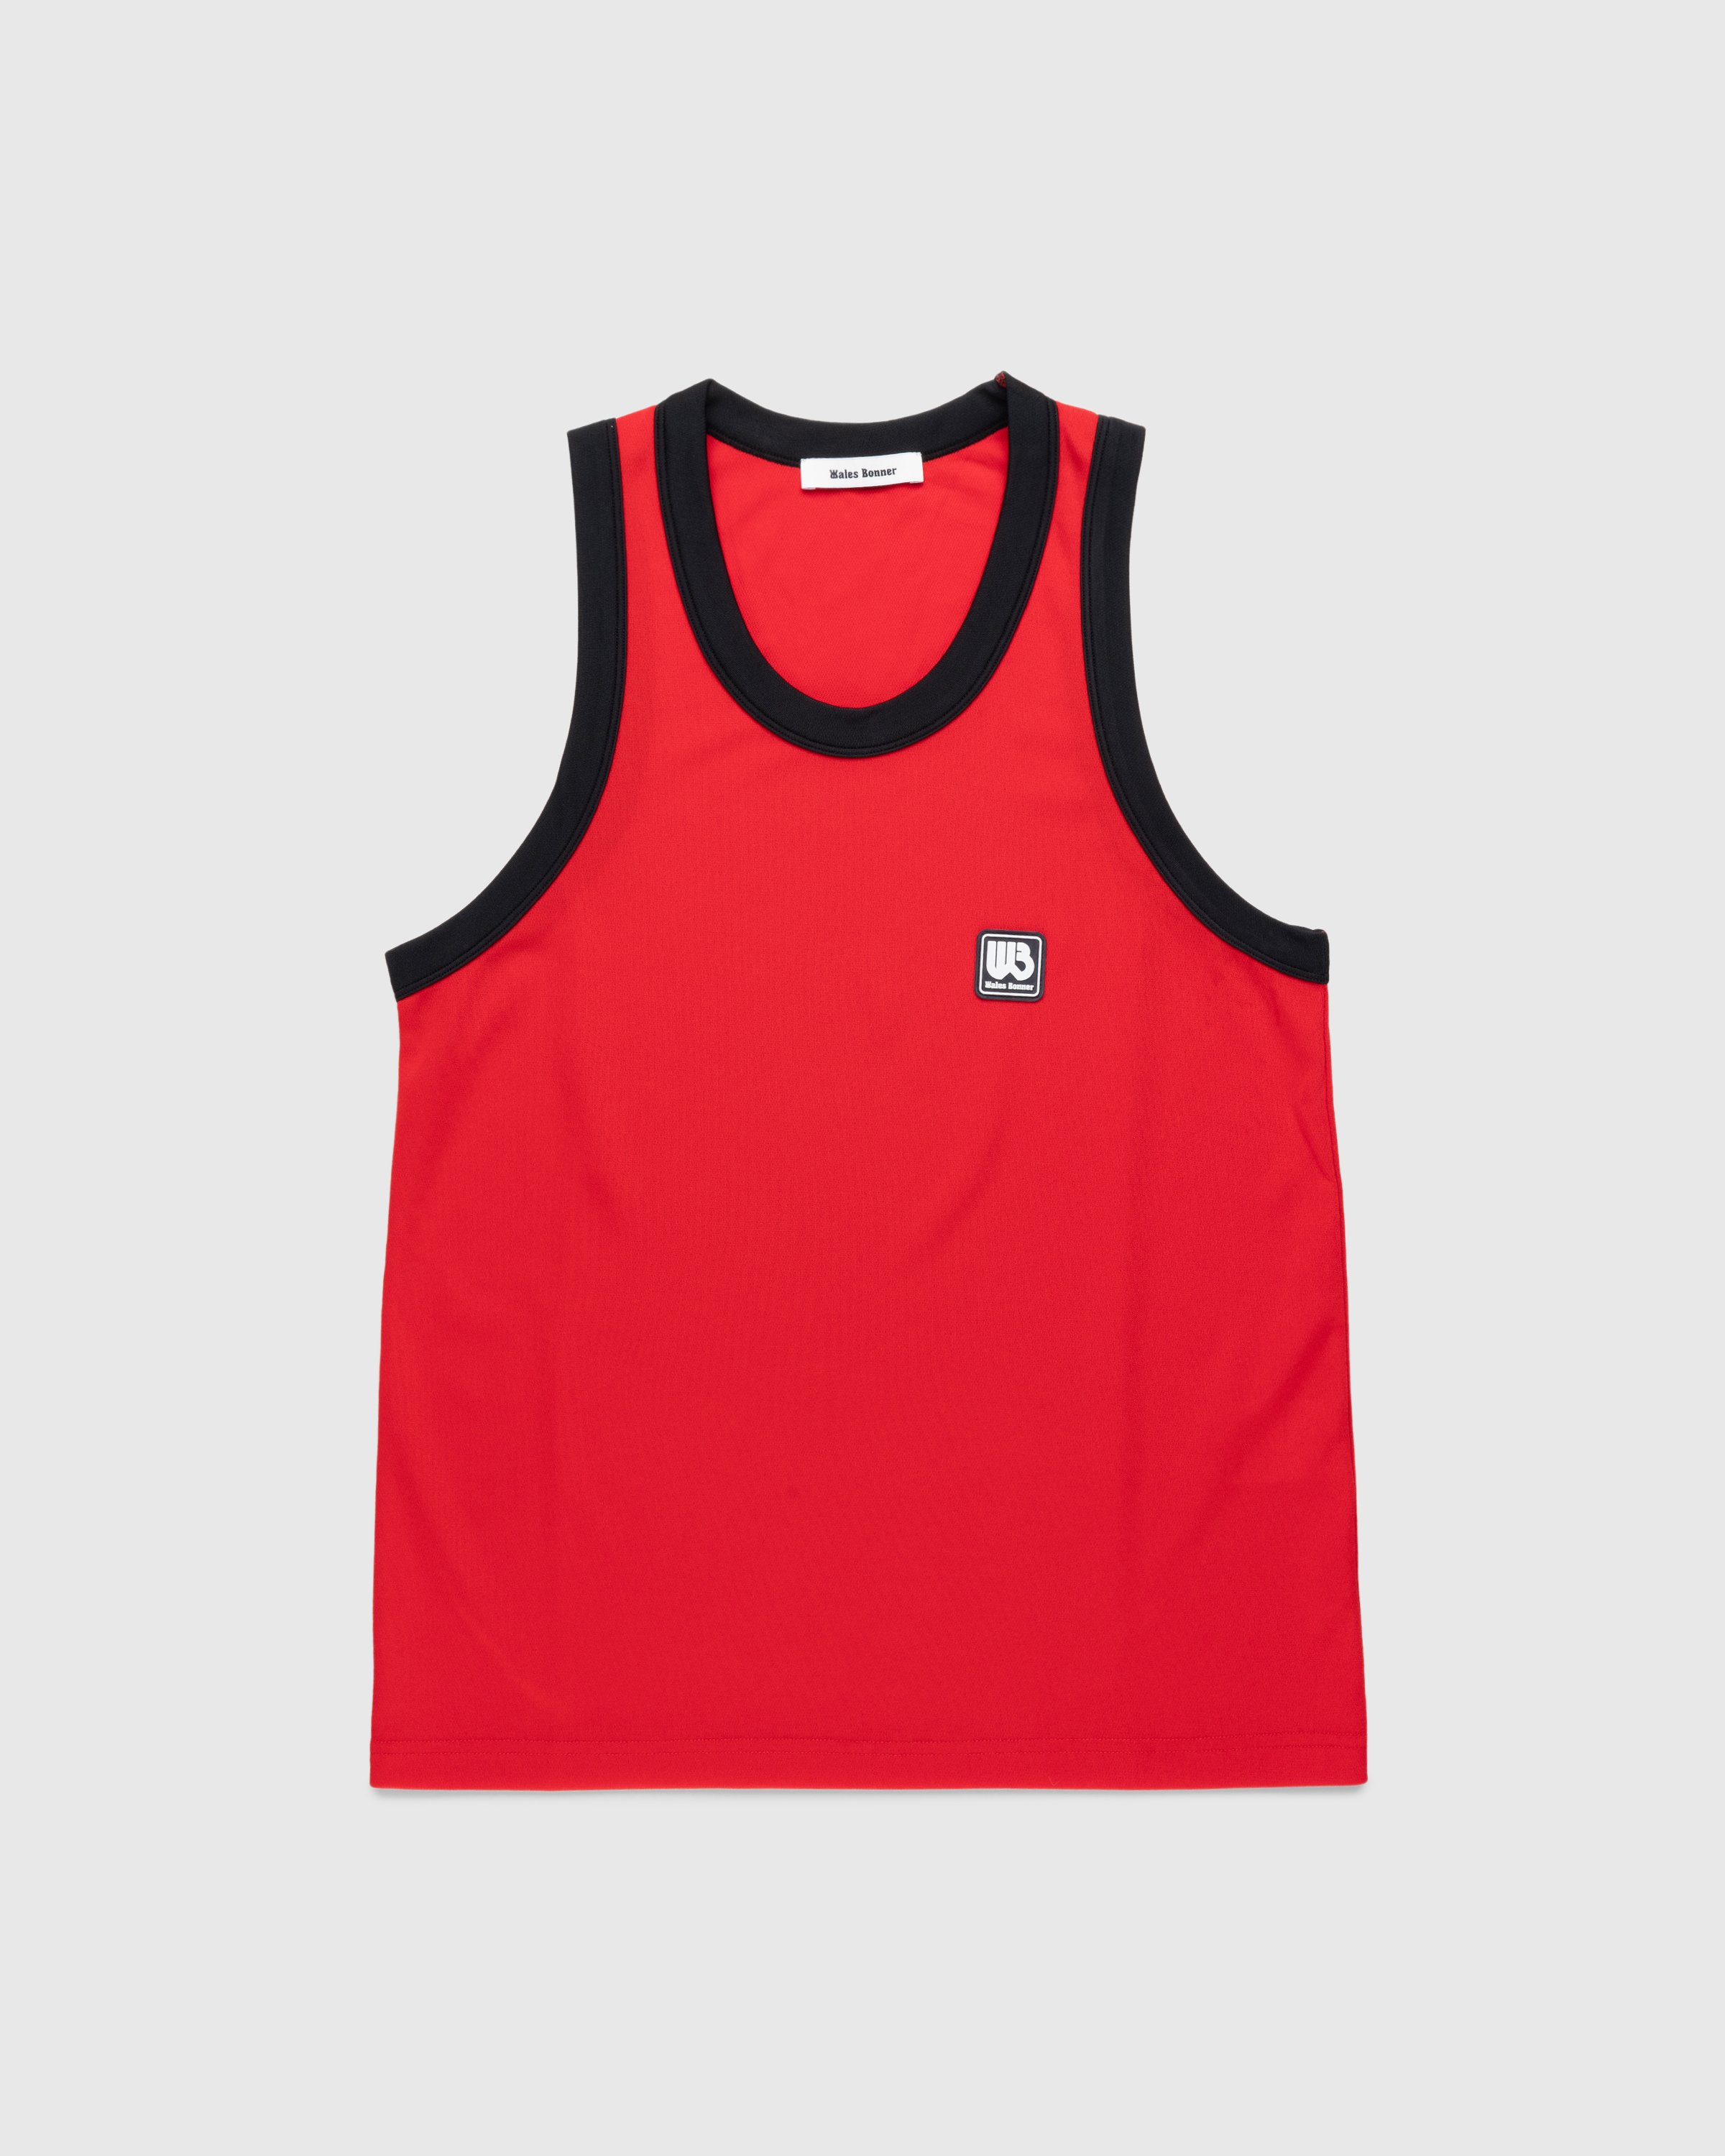 Wales Bonner - Diop Tank Top Red/Black - Clothing - Red - Image 1